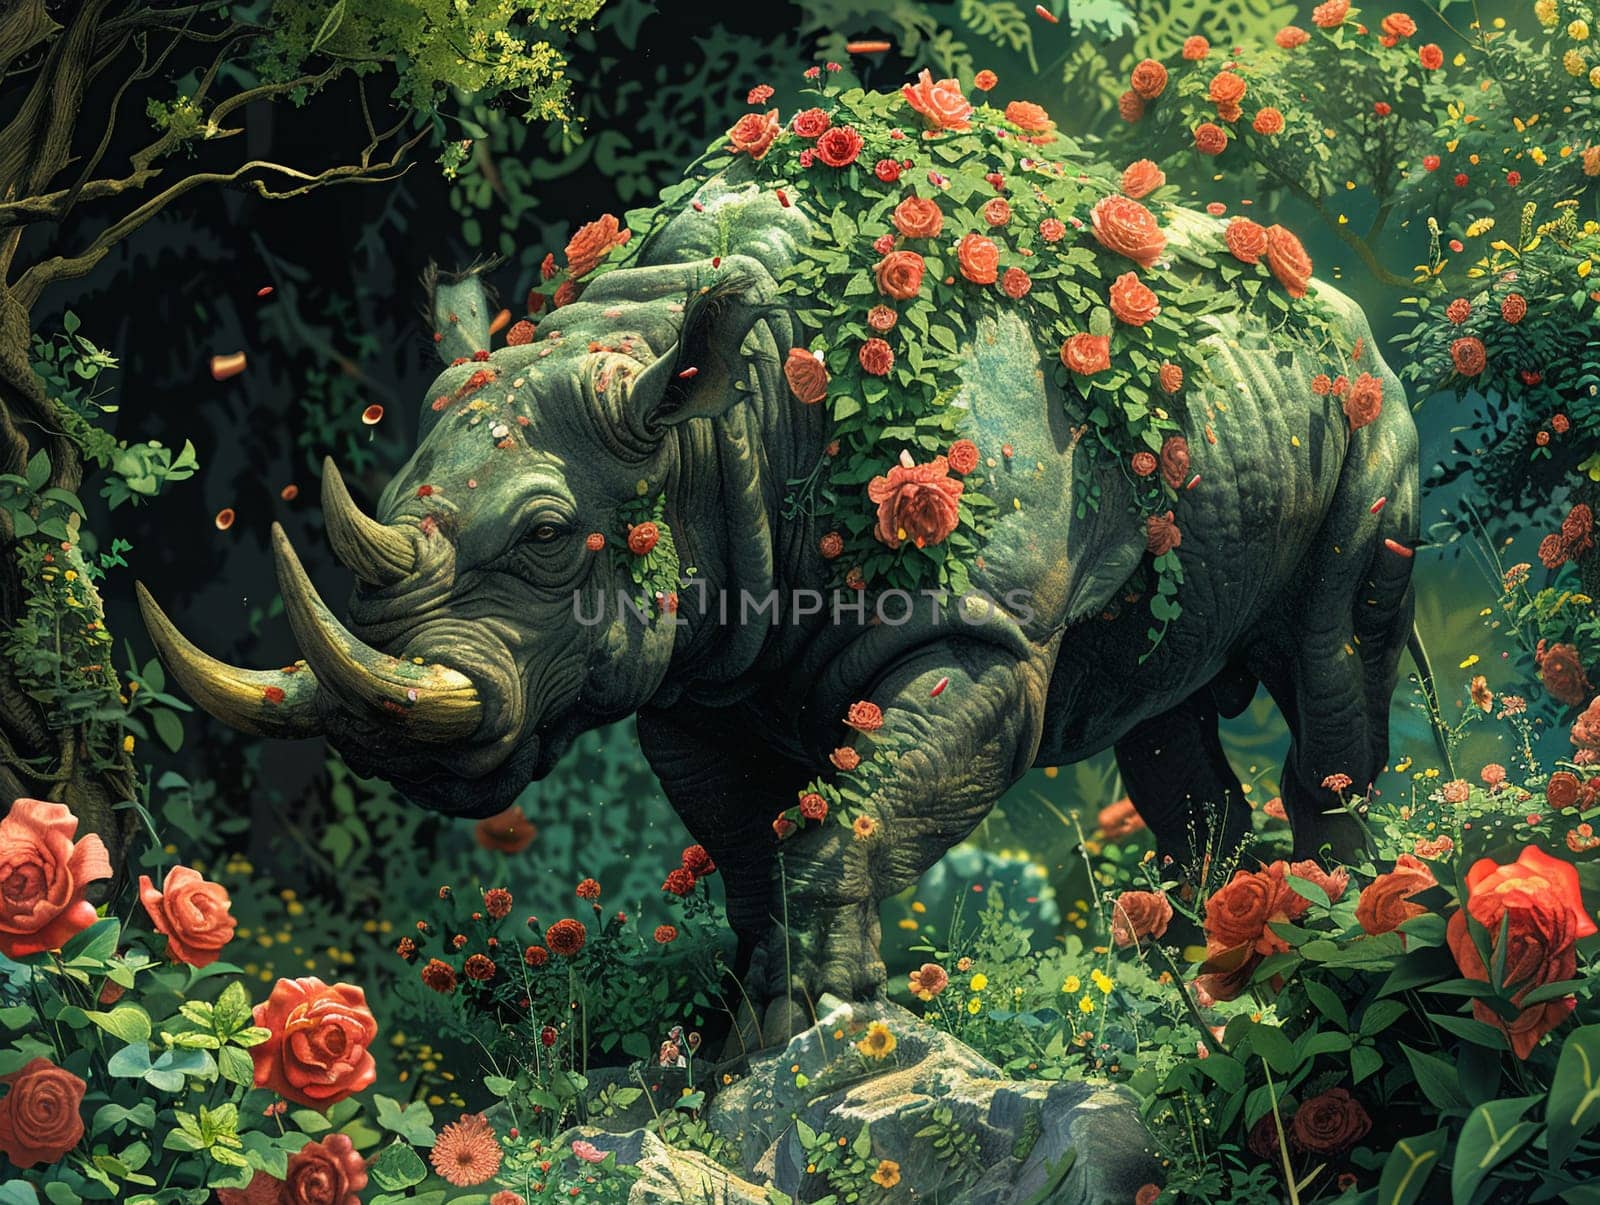 Animal kingdom reimagined with fantastical beasts in a lush, illustrated environment.